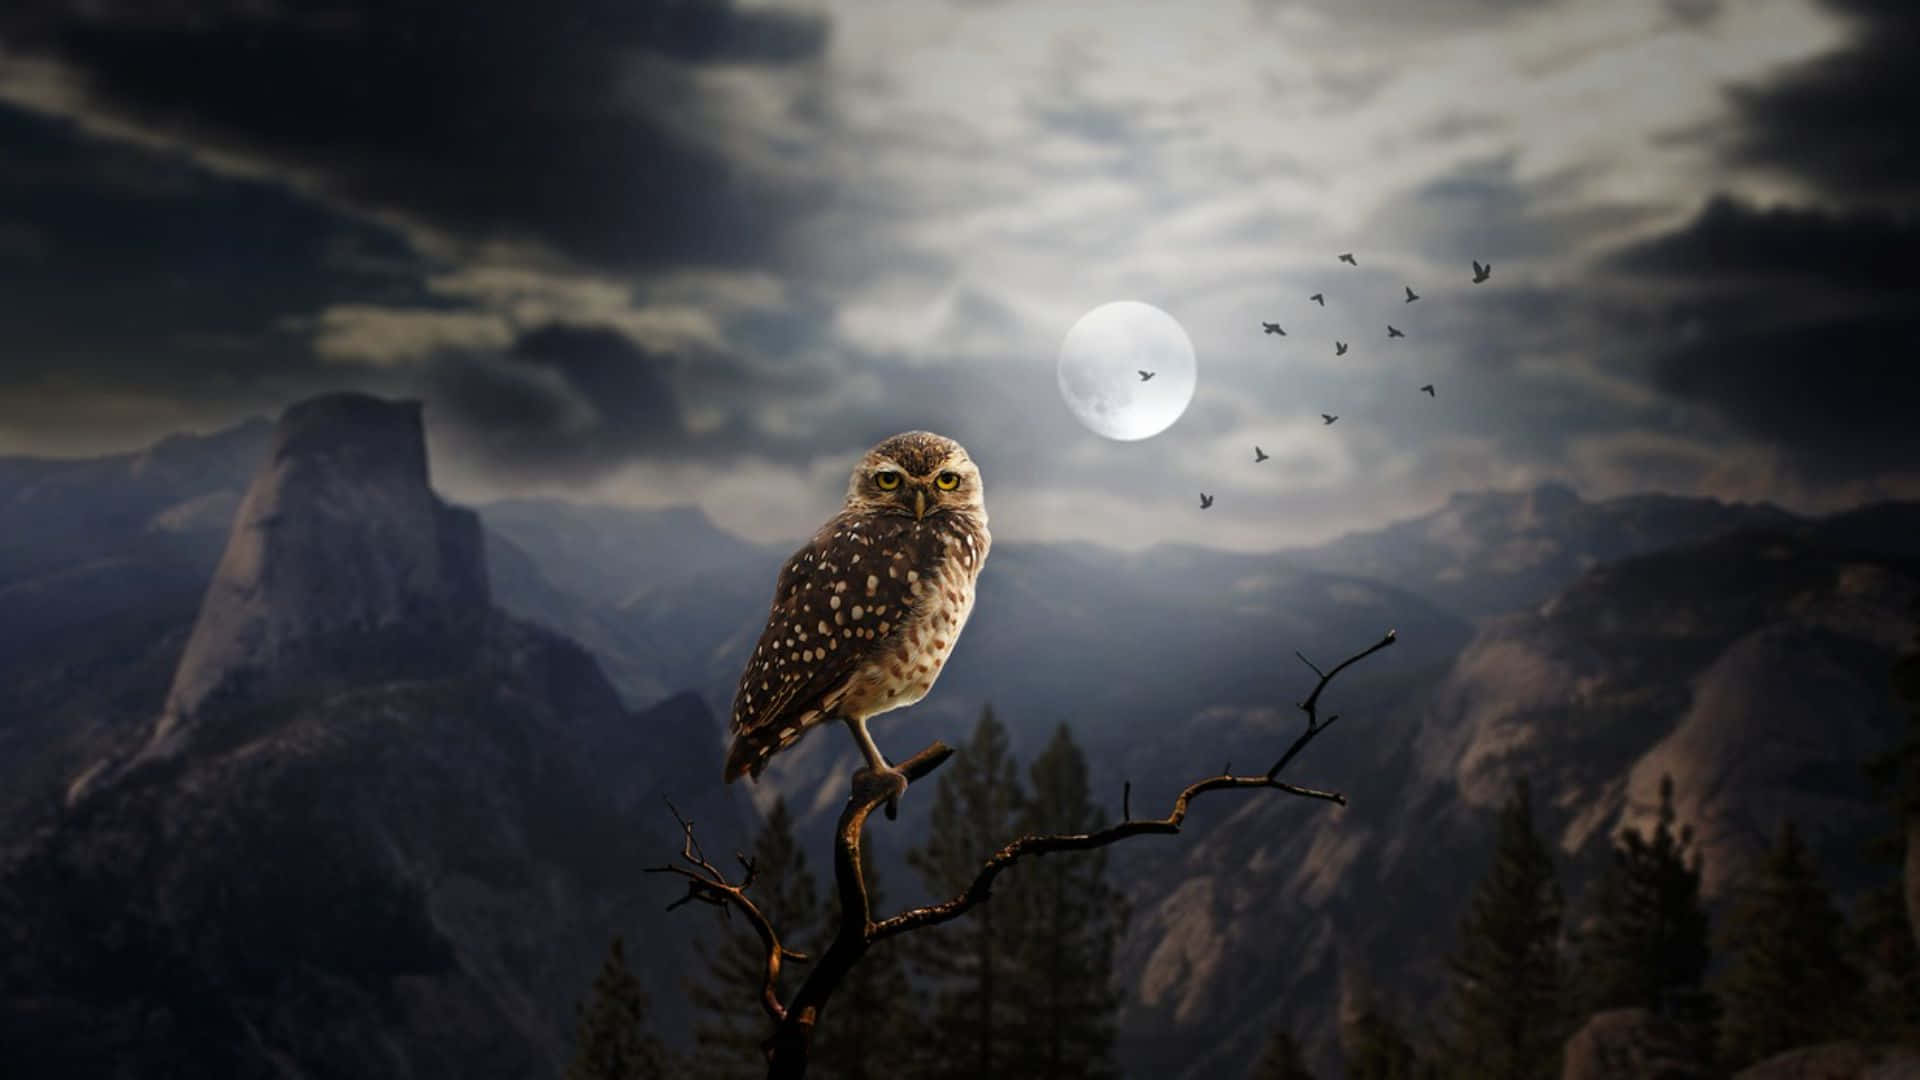 Owl Sitting On A Branch In The Mountains